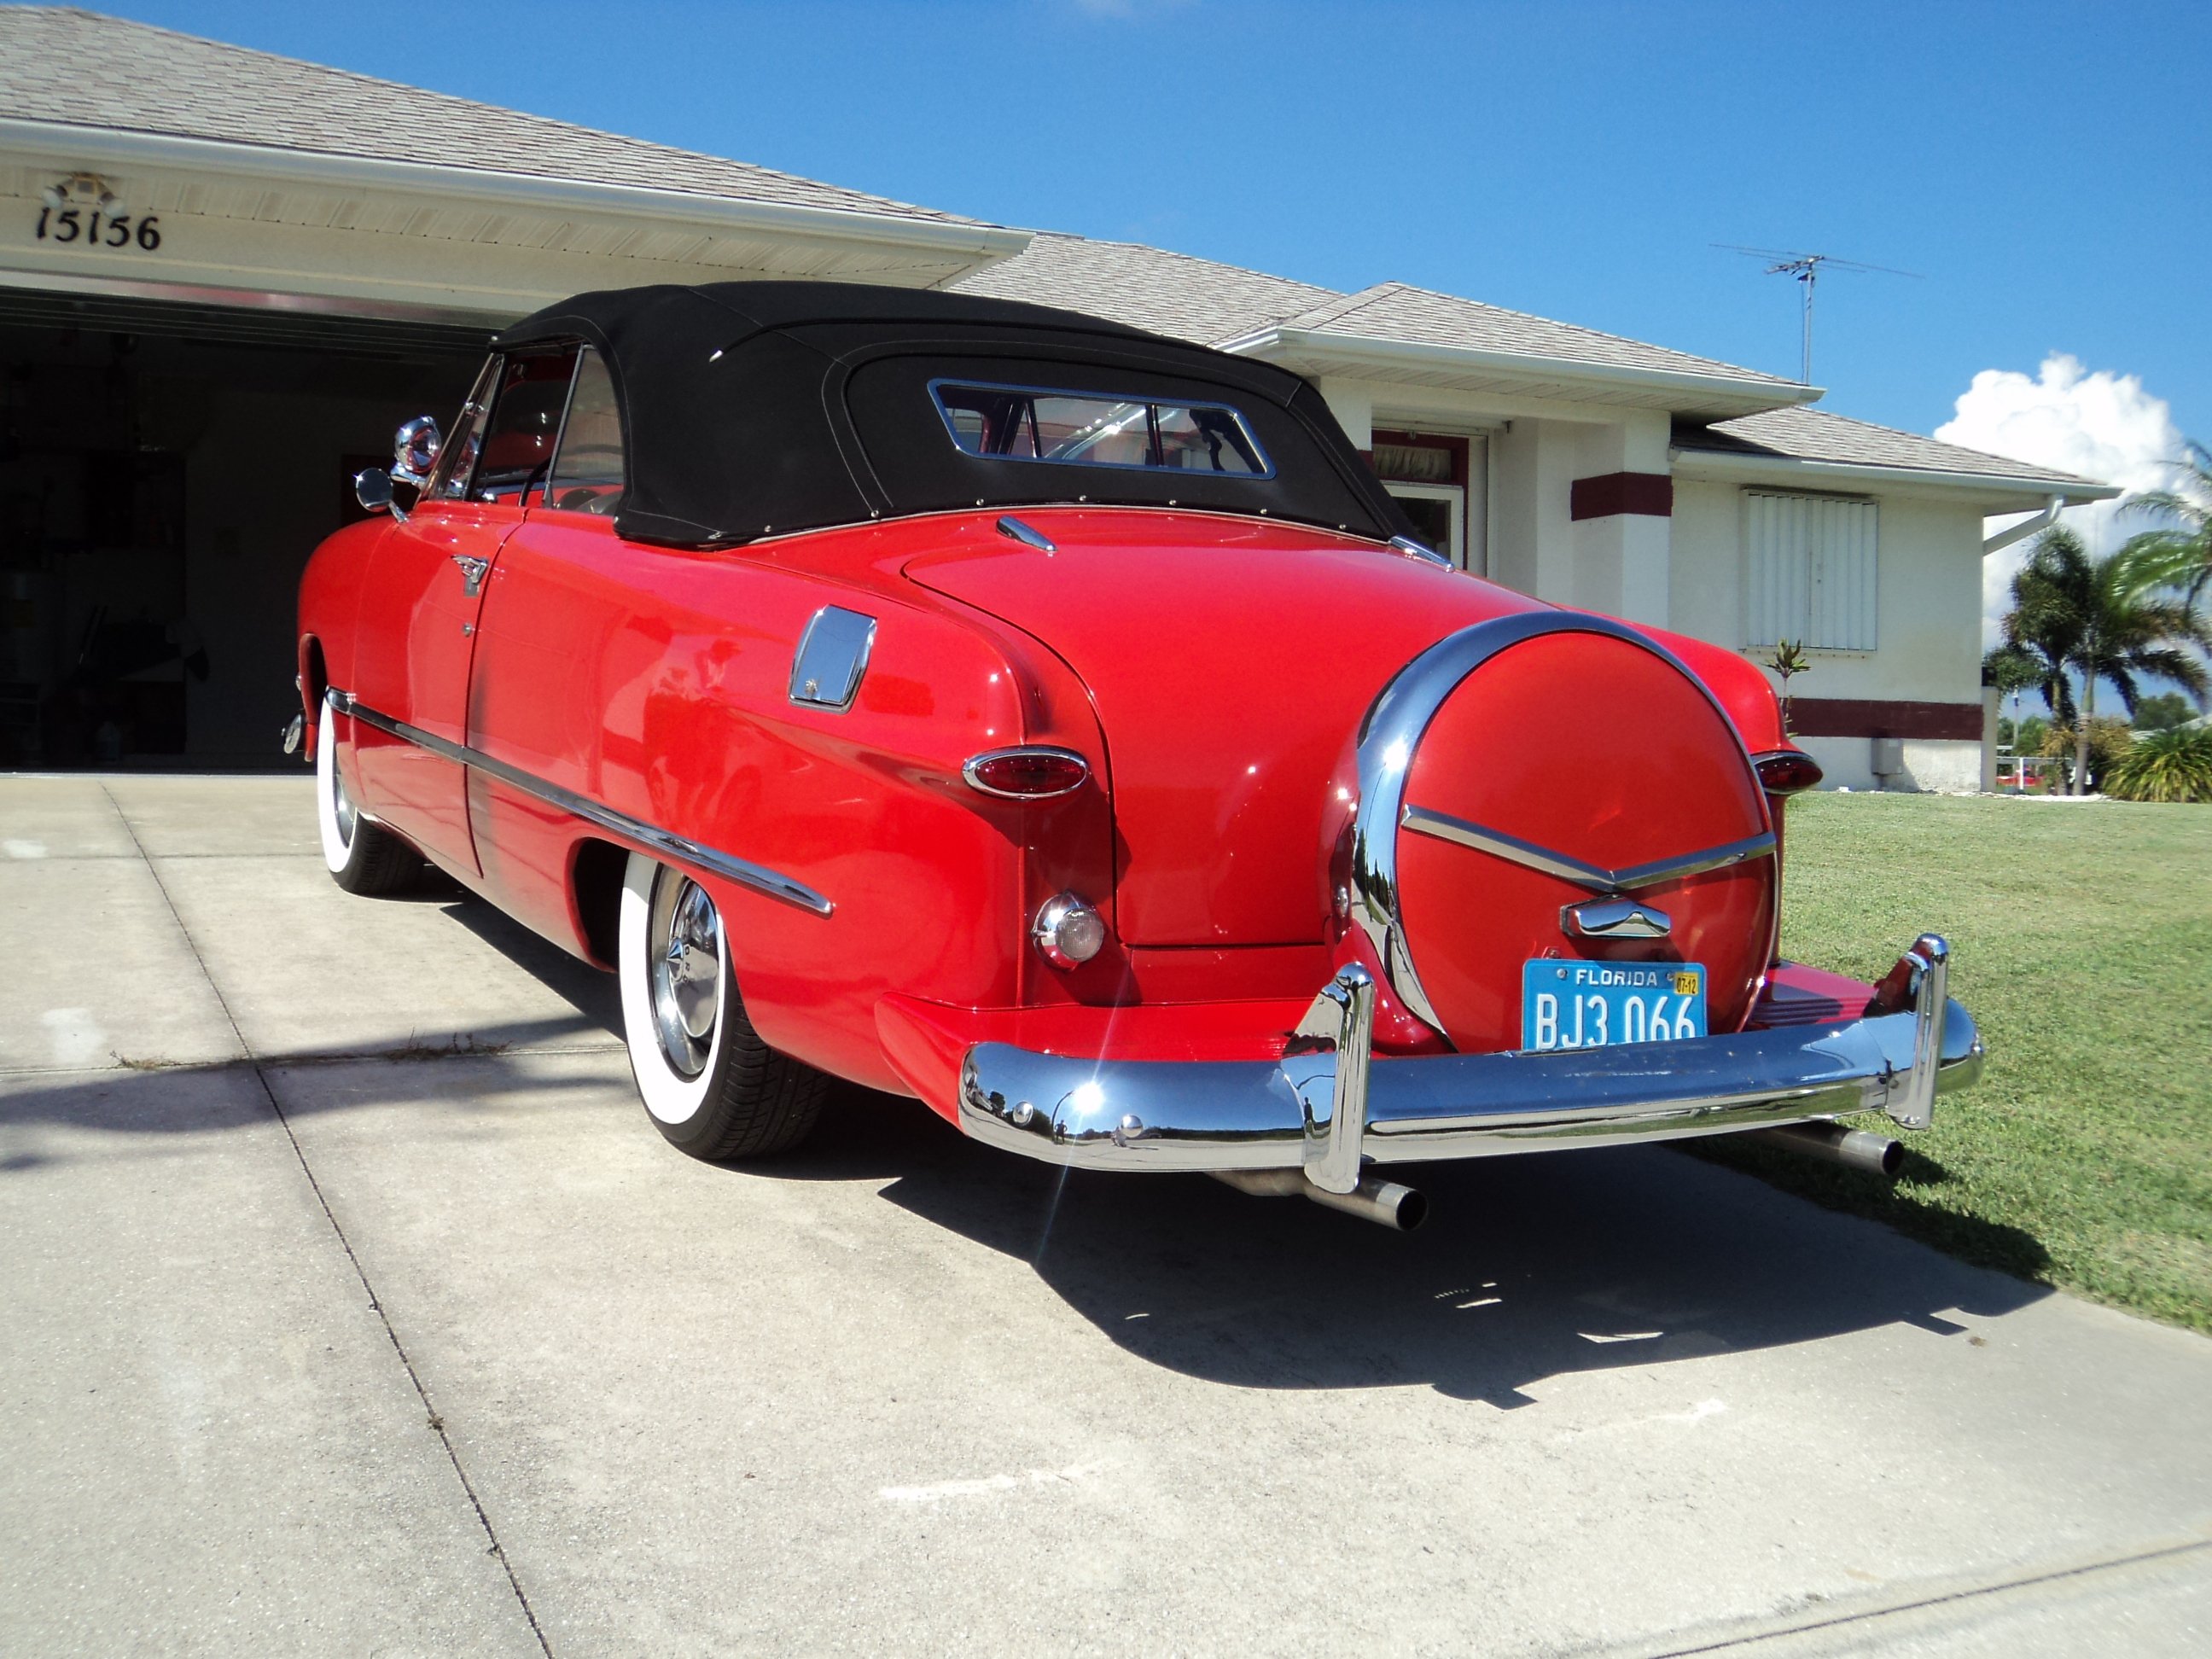 1950, Ford, Custonline, Deluxe, Convertible, Red, Classic, Old, Vintage, Original, Usa, 2592x1944 07 Wallpaper